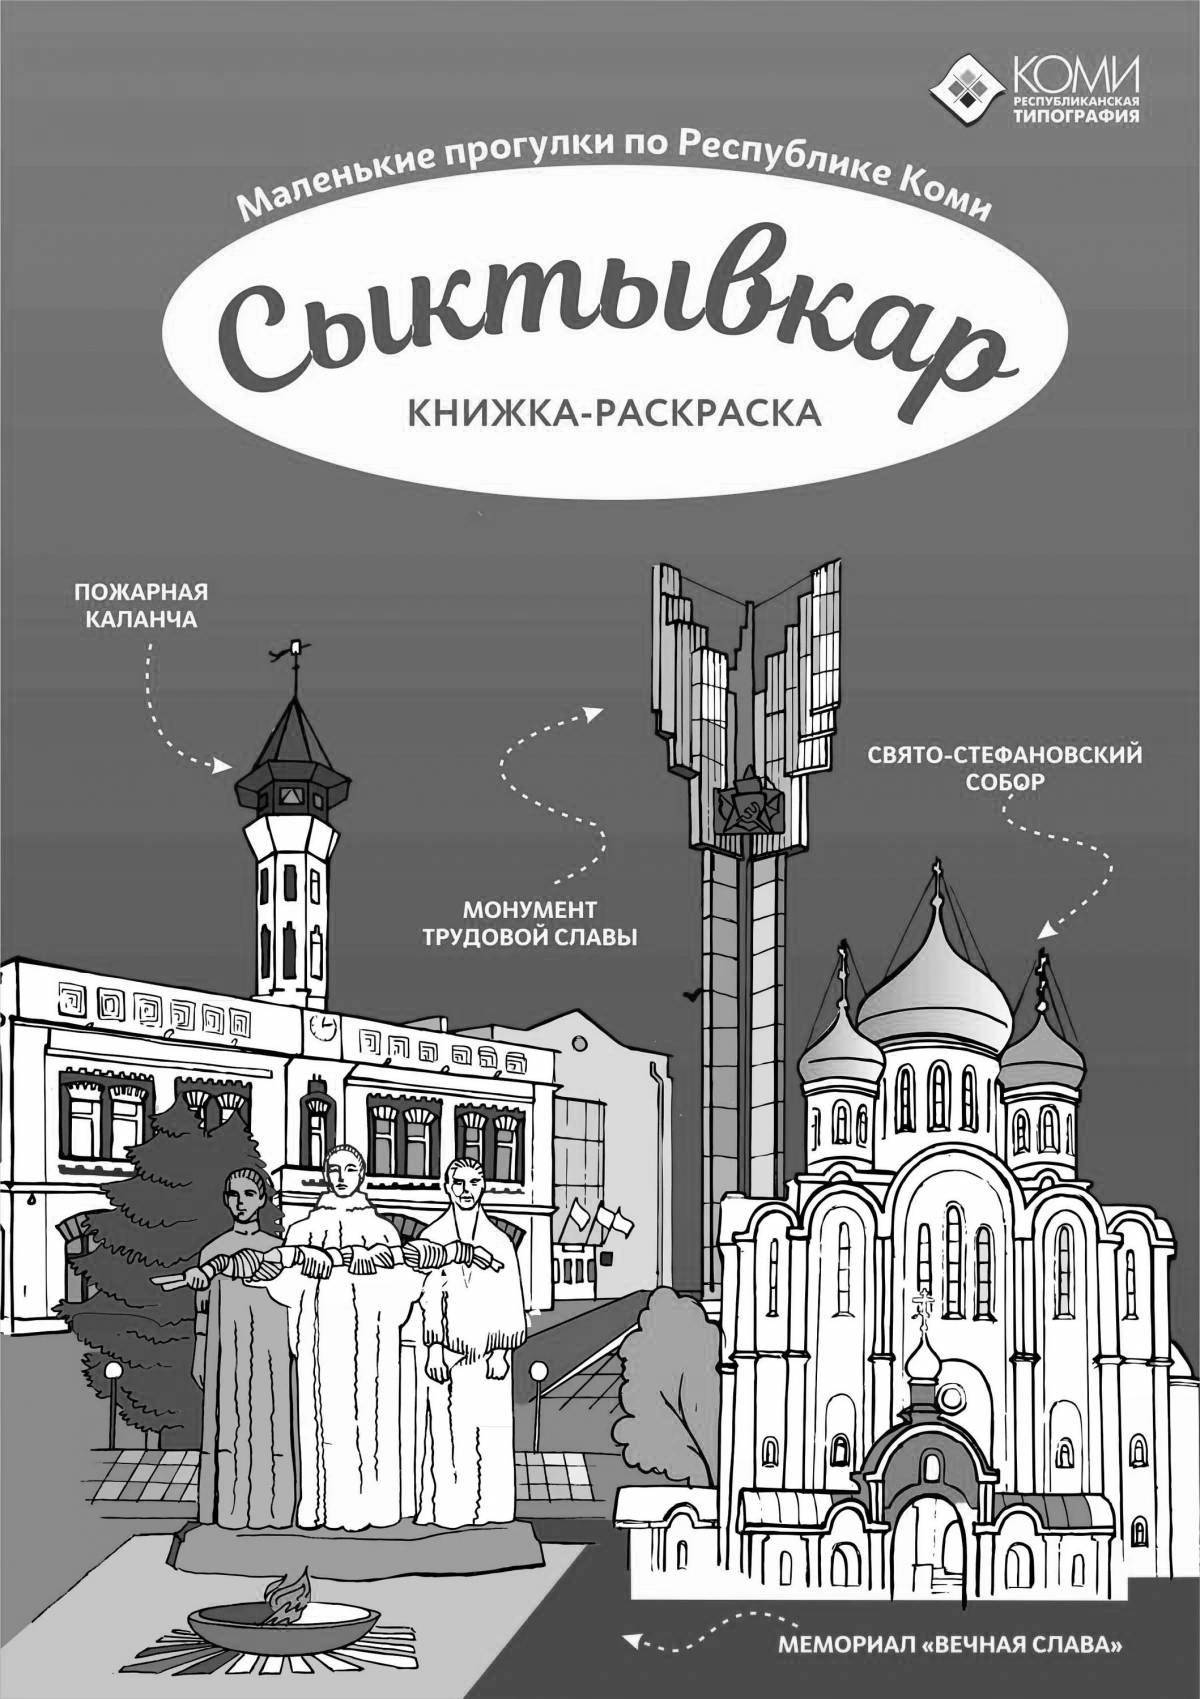 Coloring page charming coat of arms of the Komi Republic